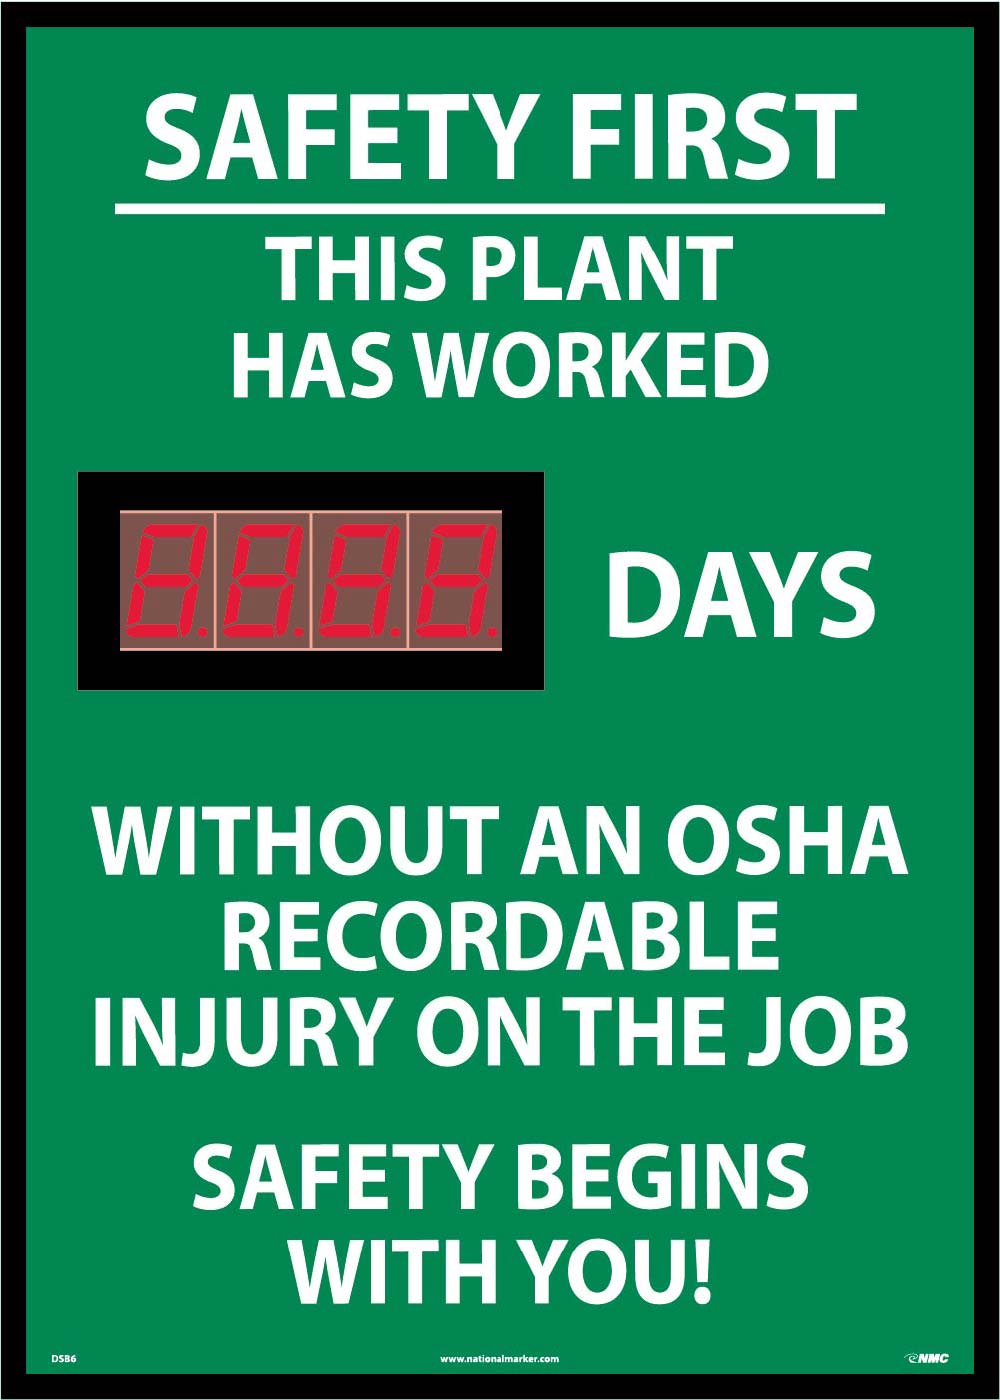 Safety First This Plant Has Worked Digital Scoreboard-eSafety Supplies, Inc